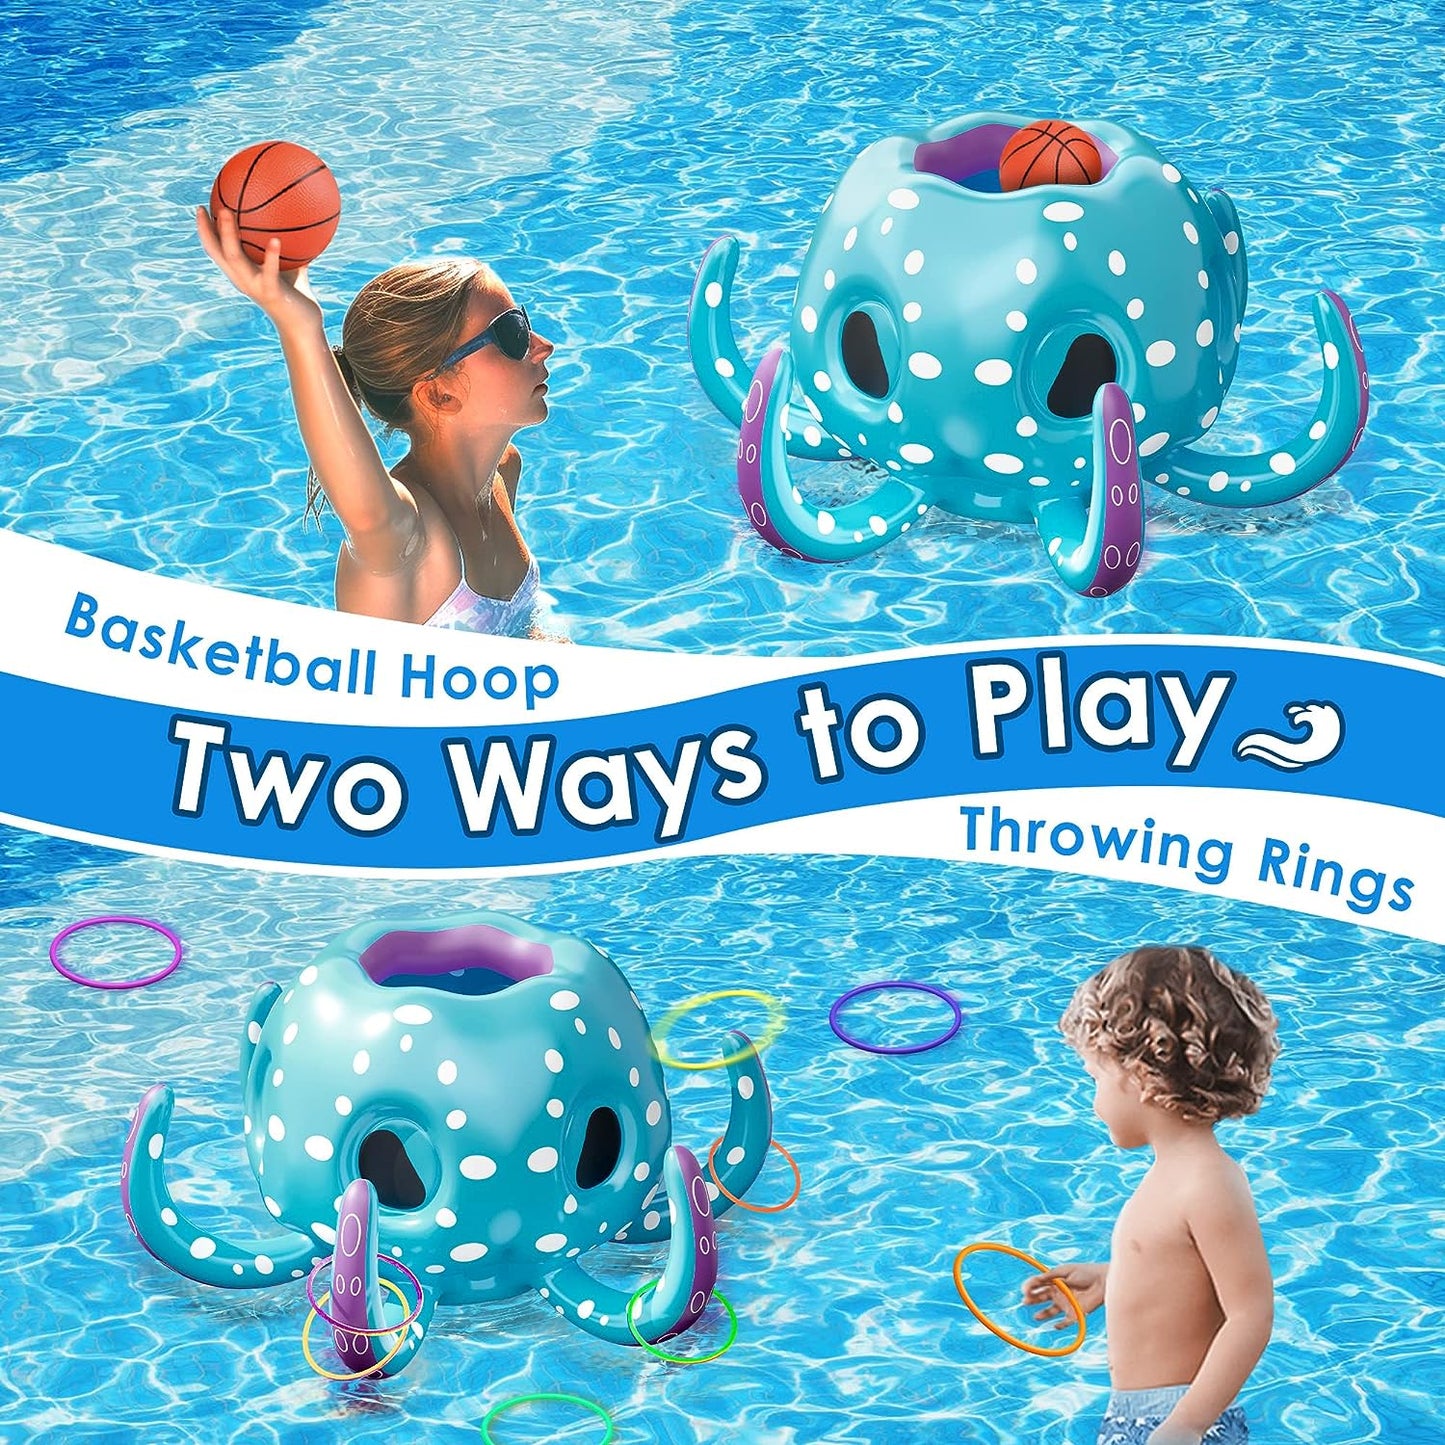 iPlay, iLearn Kids Octopus Pool Toys, 2-in-1 Inflatable Basketball Hoop & Ring Toss Games, Toddler Outdoor Floating Water Fun Play, Cool Summer Swim Family Party Gift 3 4 5 6 7 8 Yr Old Boy Girl Teens